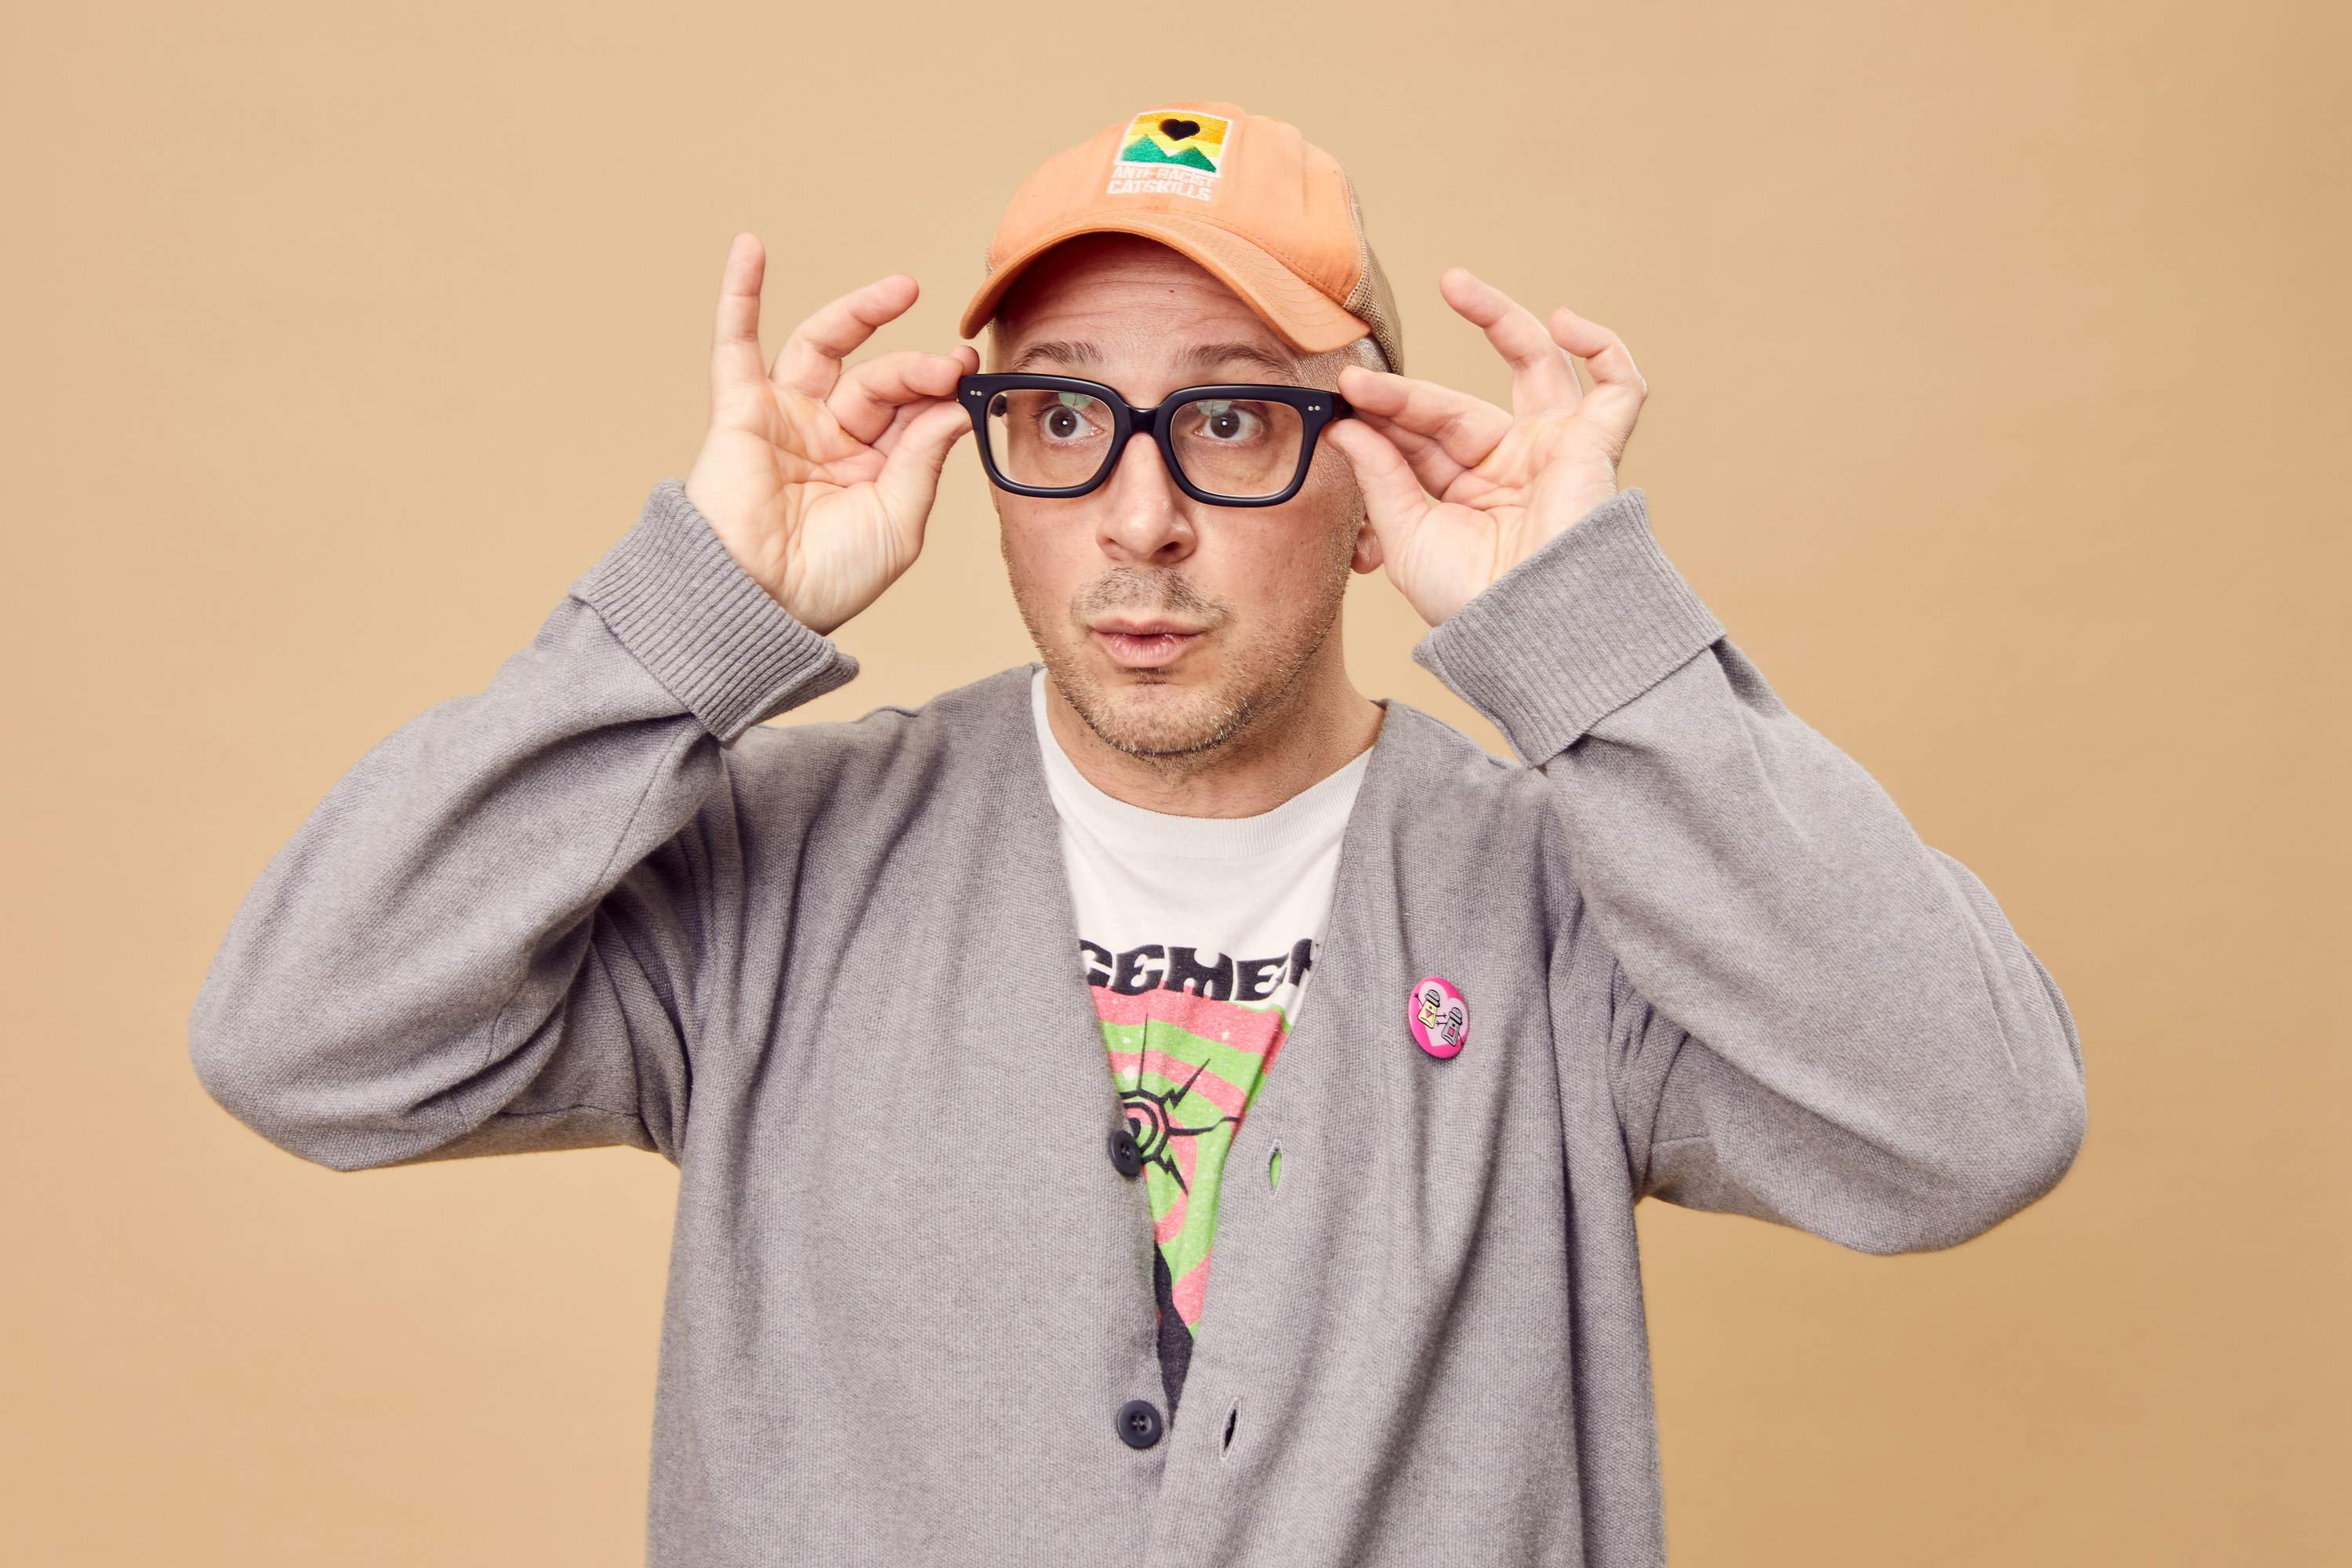 Steve adjusts his eyeglasses as he looks off-camera. He&#x27;s wearing a baseball cap, a band shirt, and a sweater